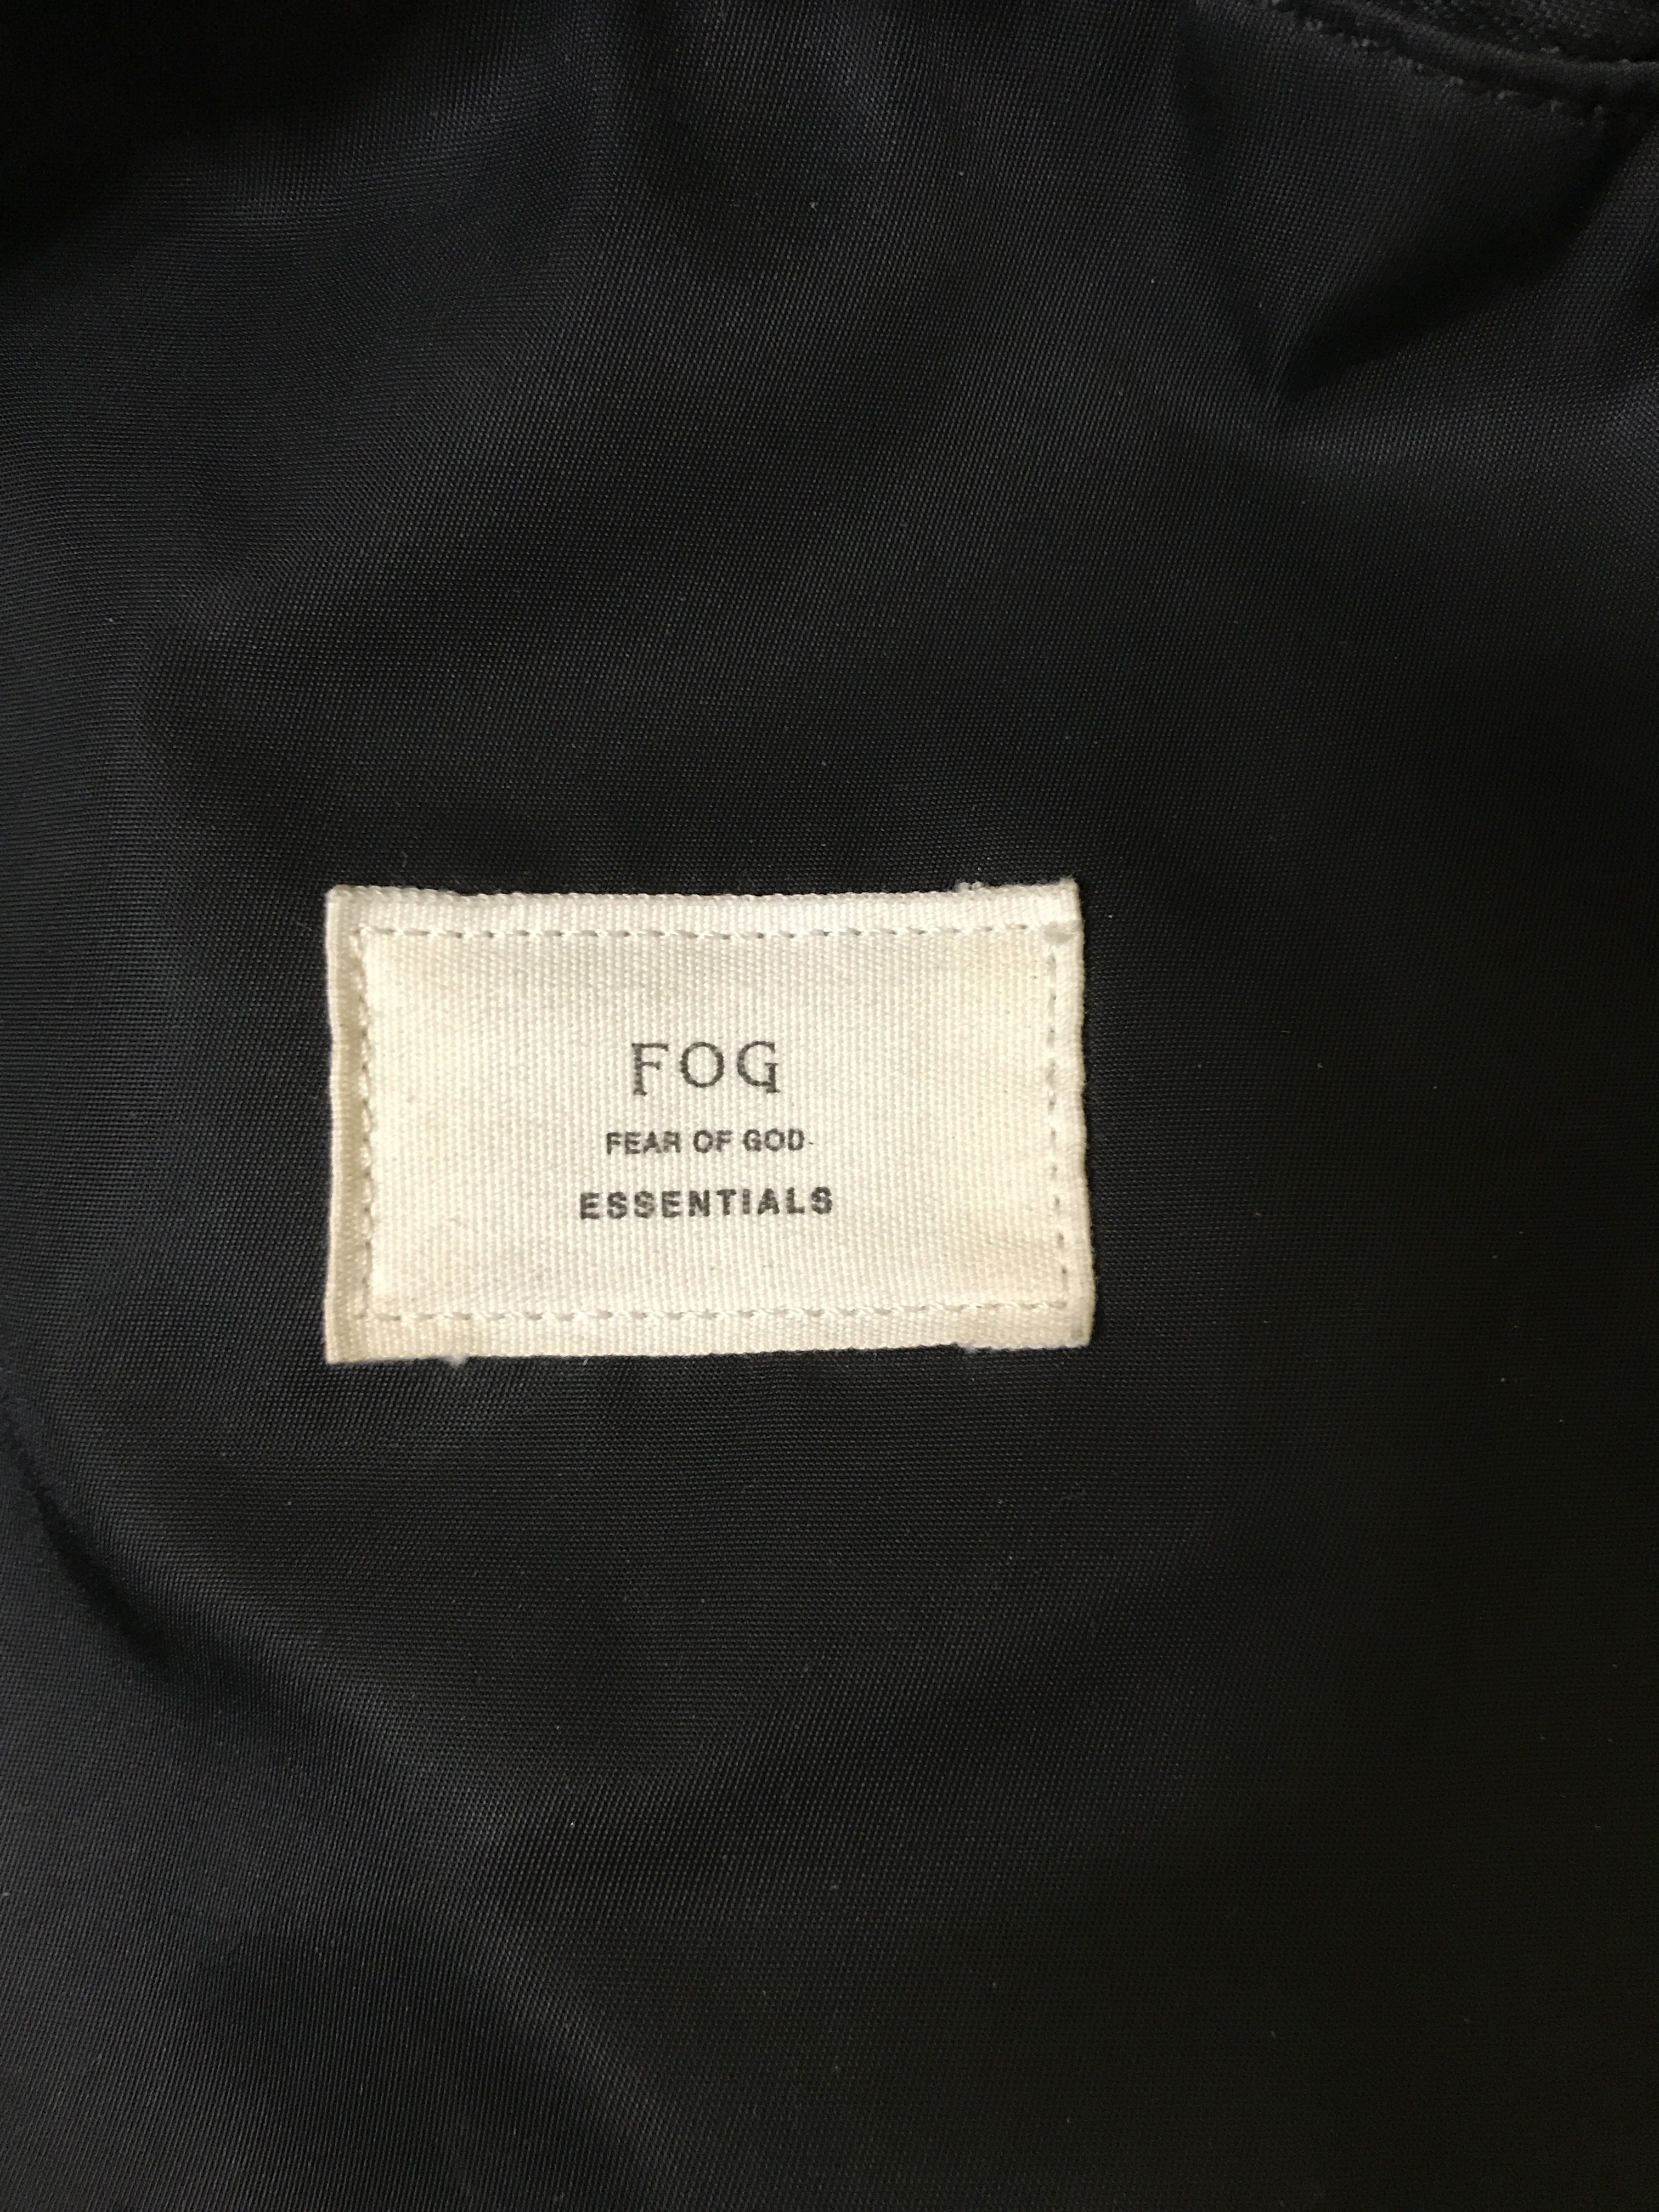 Fear of God Essentials Backpack - 4